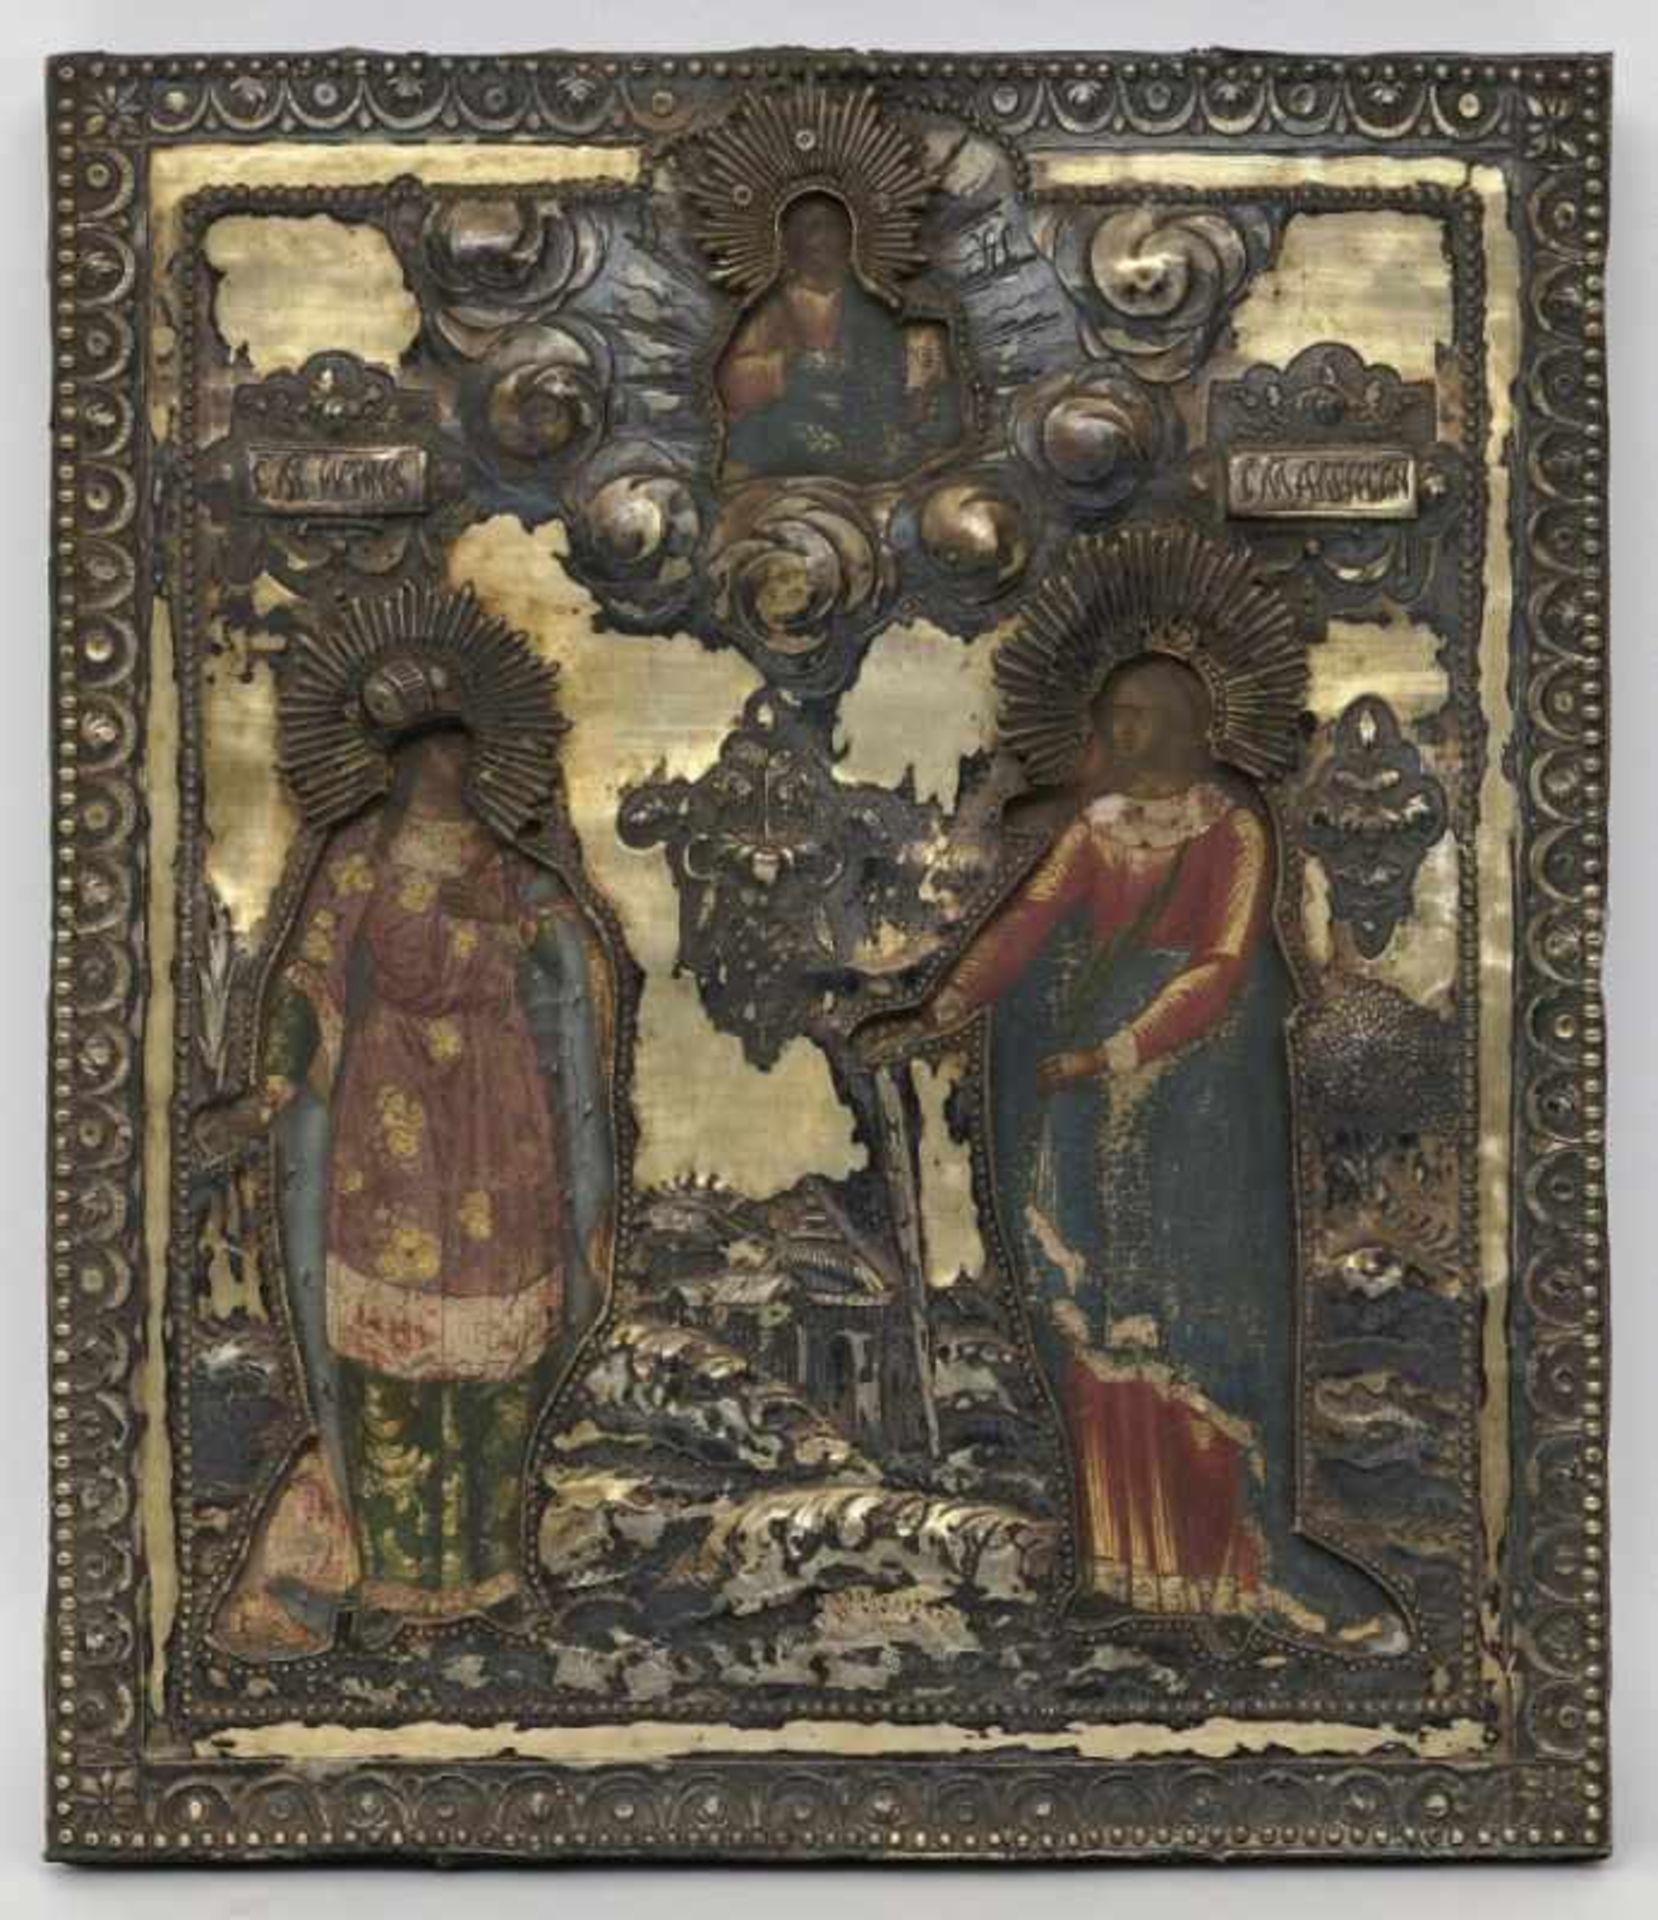 Two martyrsRussia, gilded silver oklad dated 1804 Tempera on panel. Oklad with hallmarks of